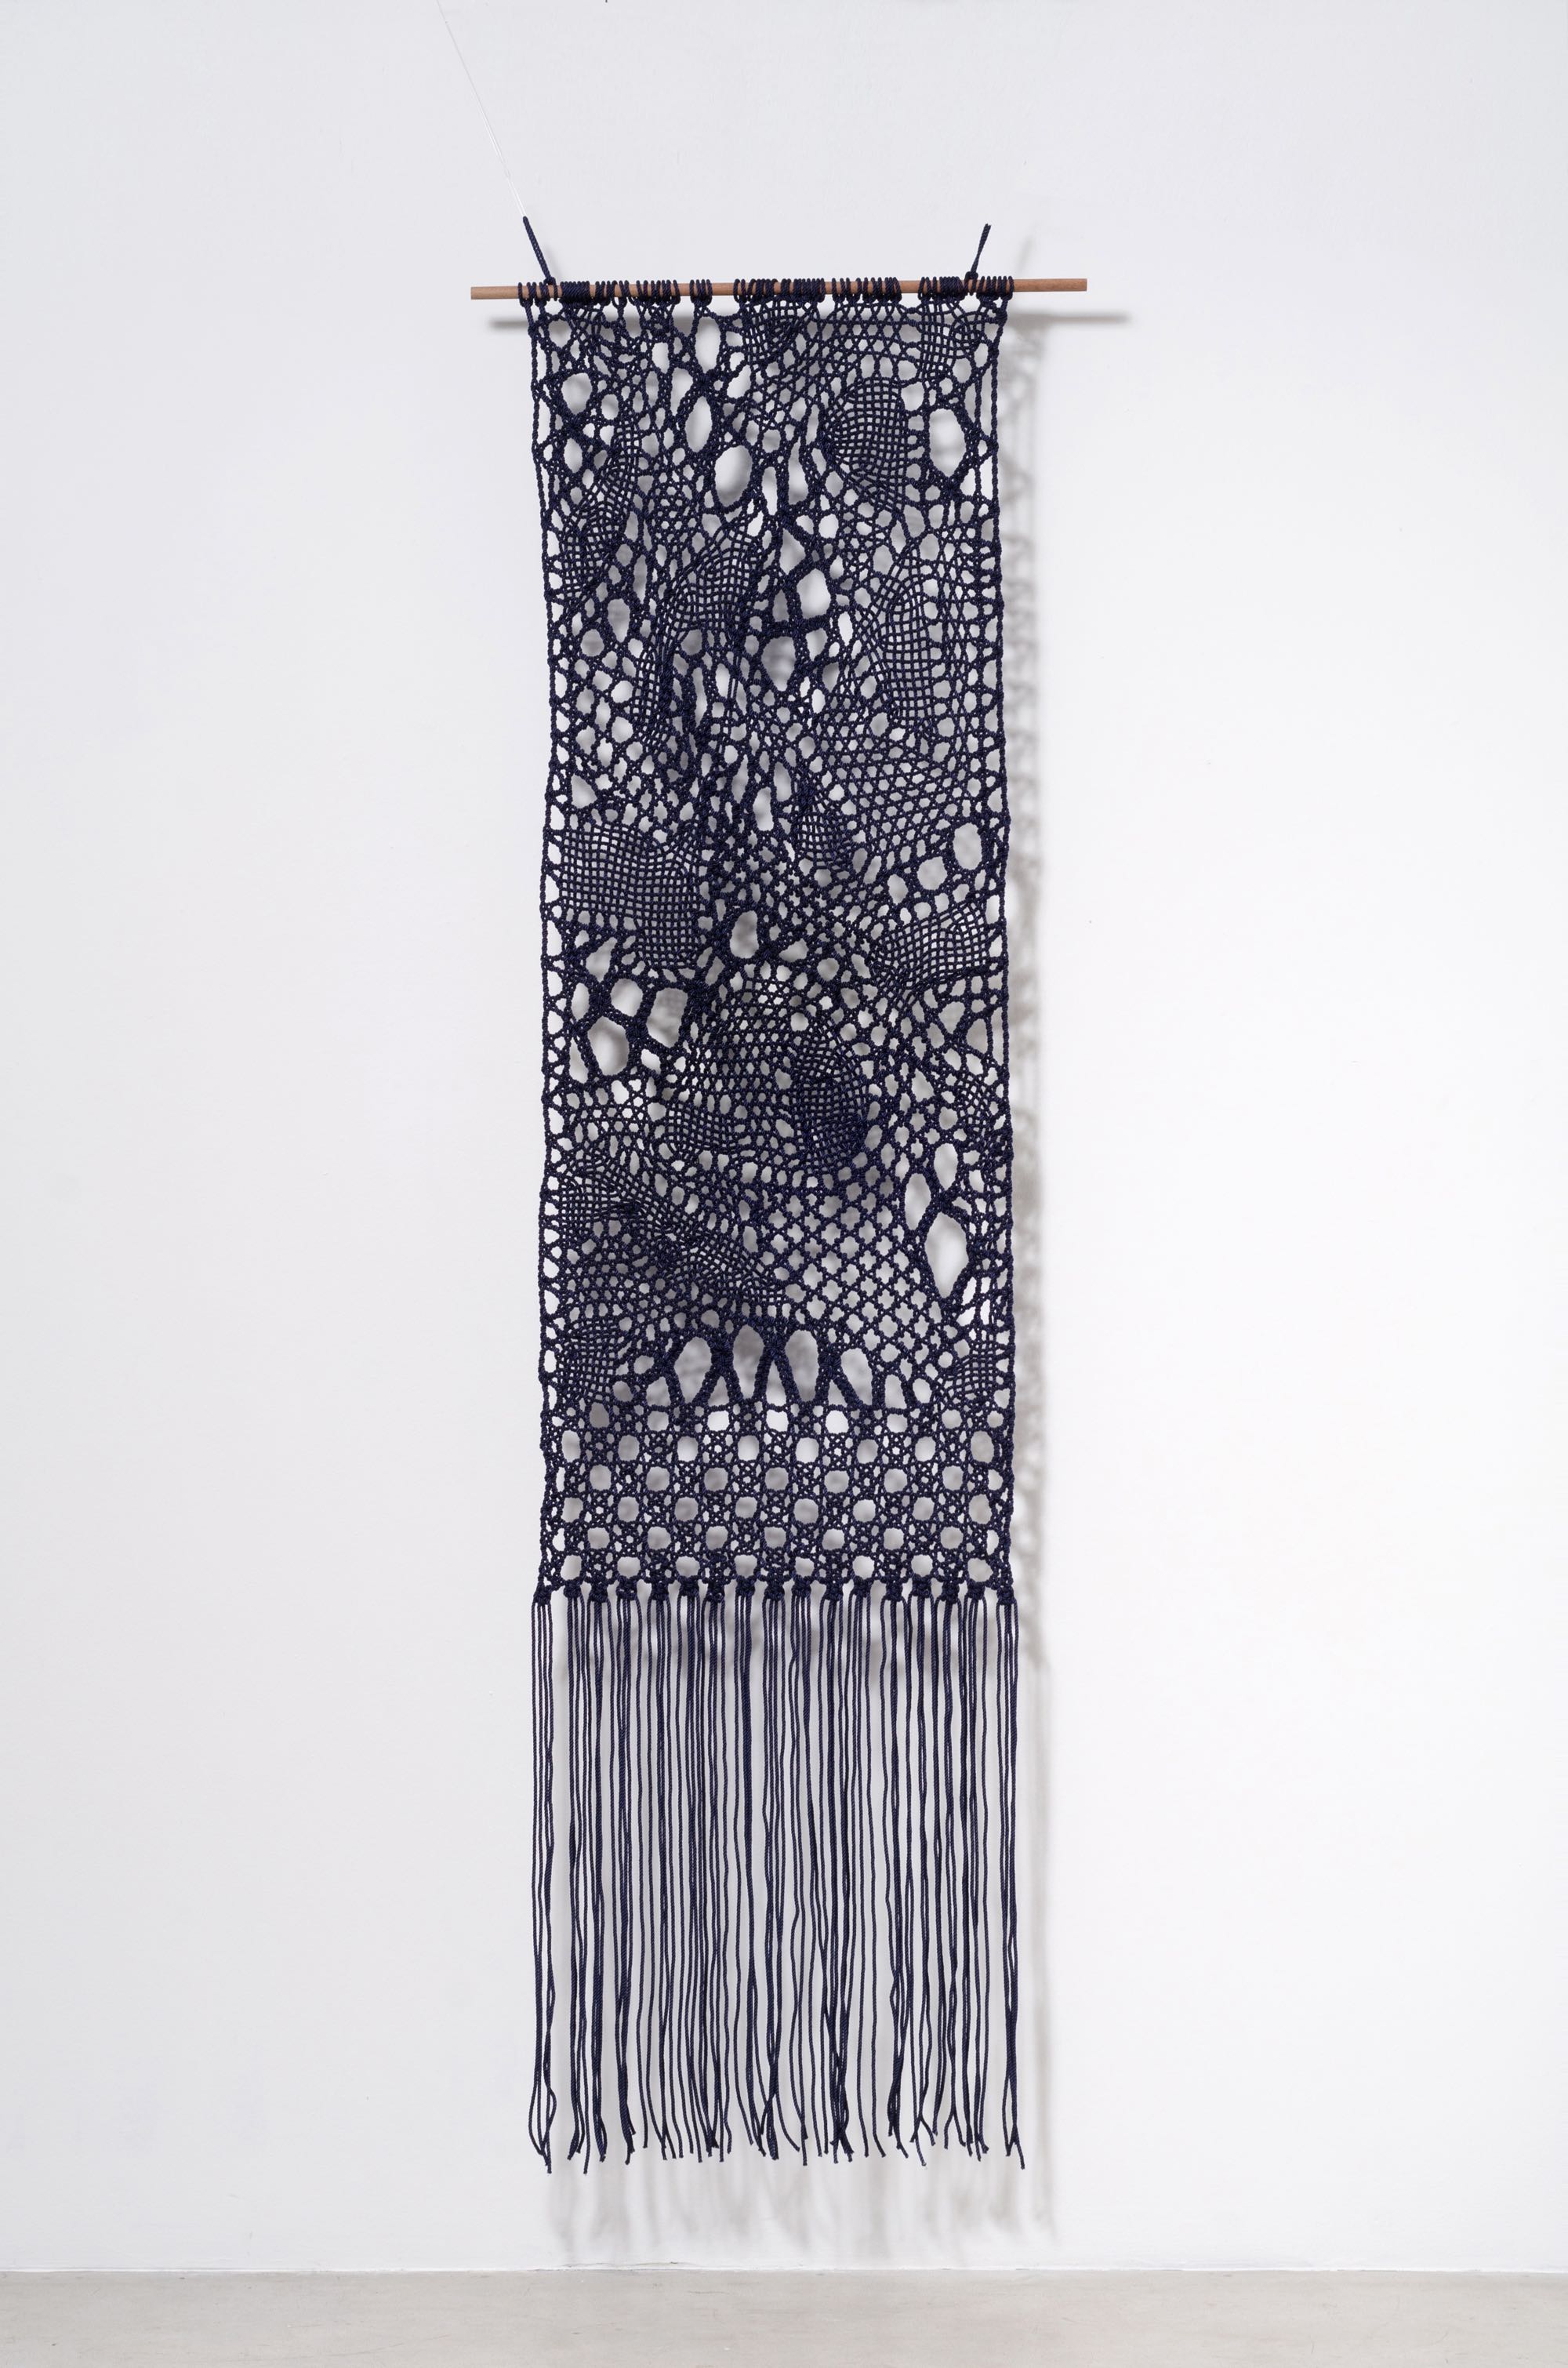 Pierre Fouche. Iemand anders II 2016. Bobbin lace in 5mm polyester rope. 280 x 74cm.